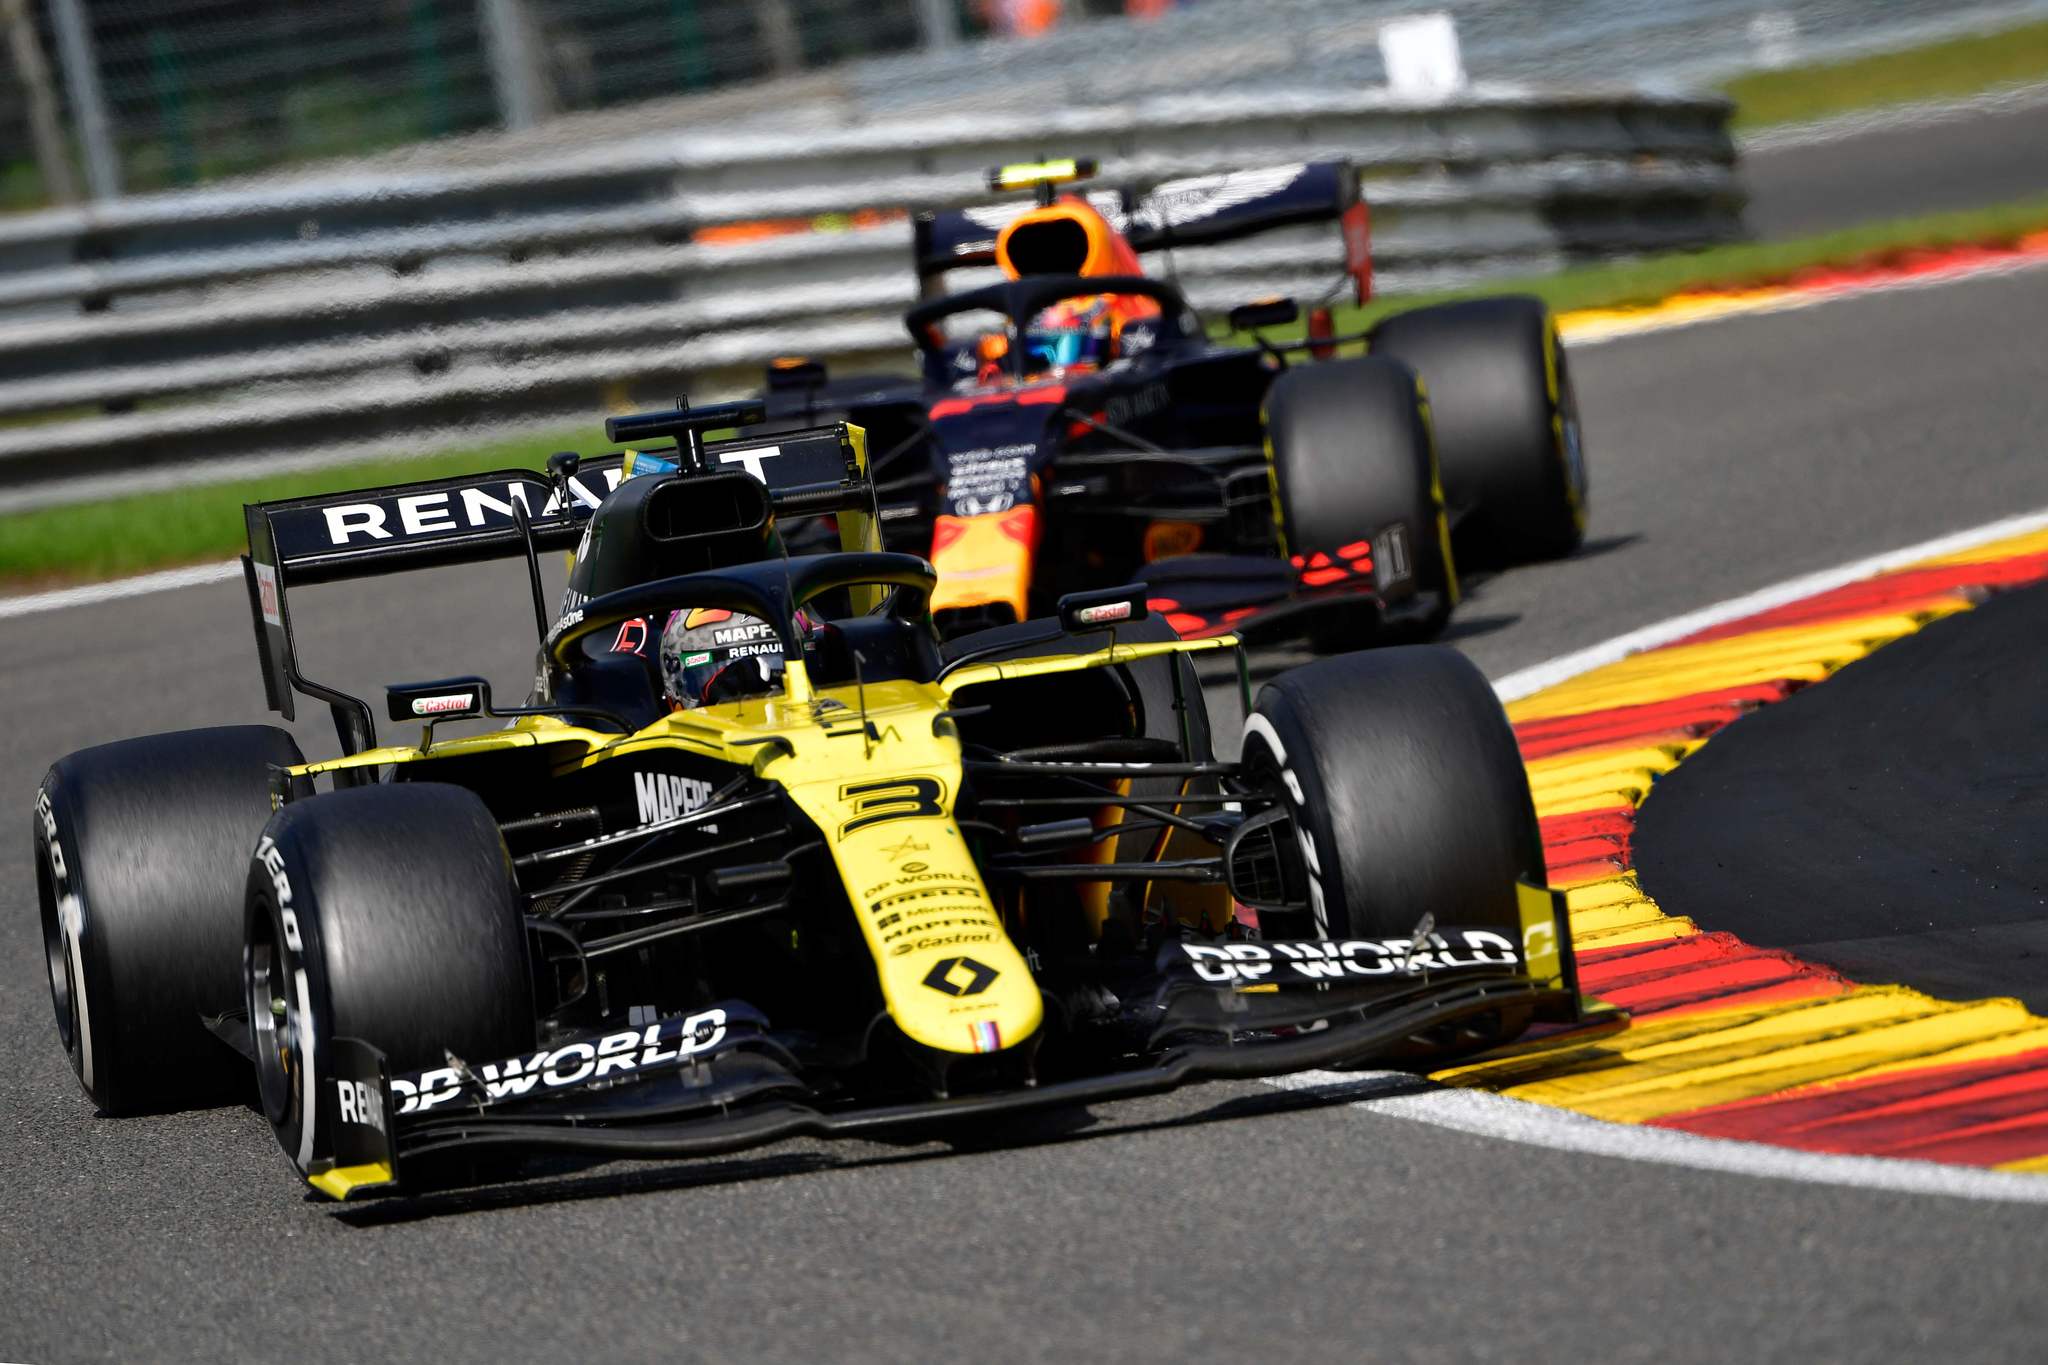 Renaults Australian driver Daniel lt;HIT gt;Ricciardo lt;/HIT gt; competes ahead of Red Bulls Thai driver Alex Albon during the Belgian Formula One Grand Prix at the Spa-Francorchamps circuit in Spa on August 30, 2020. (Photo by JOHN THYS / POOL / AFP)